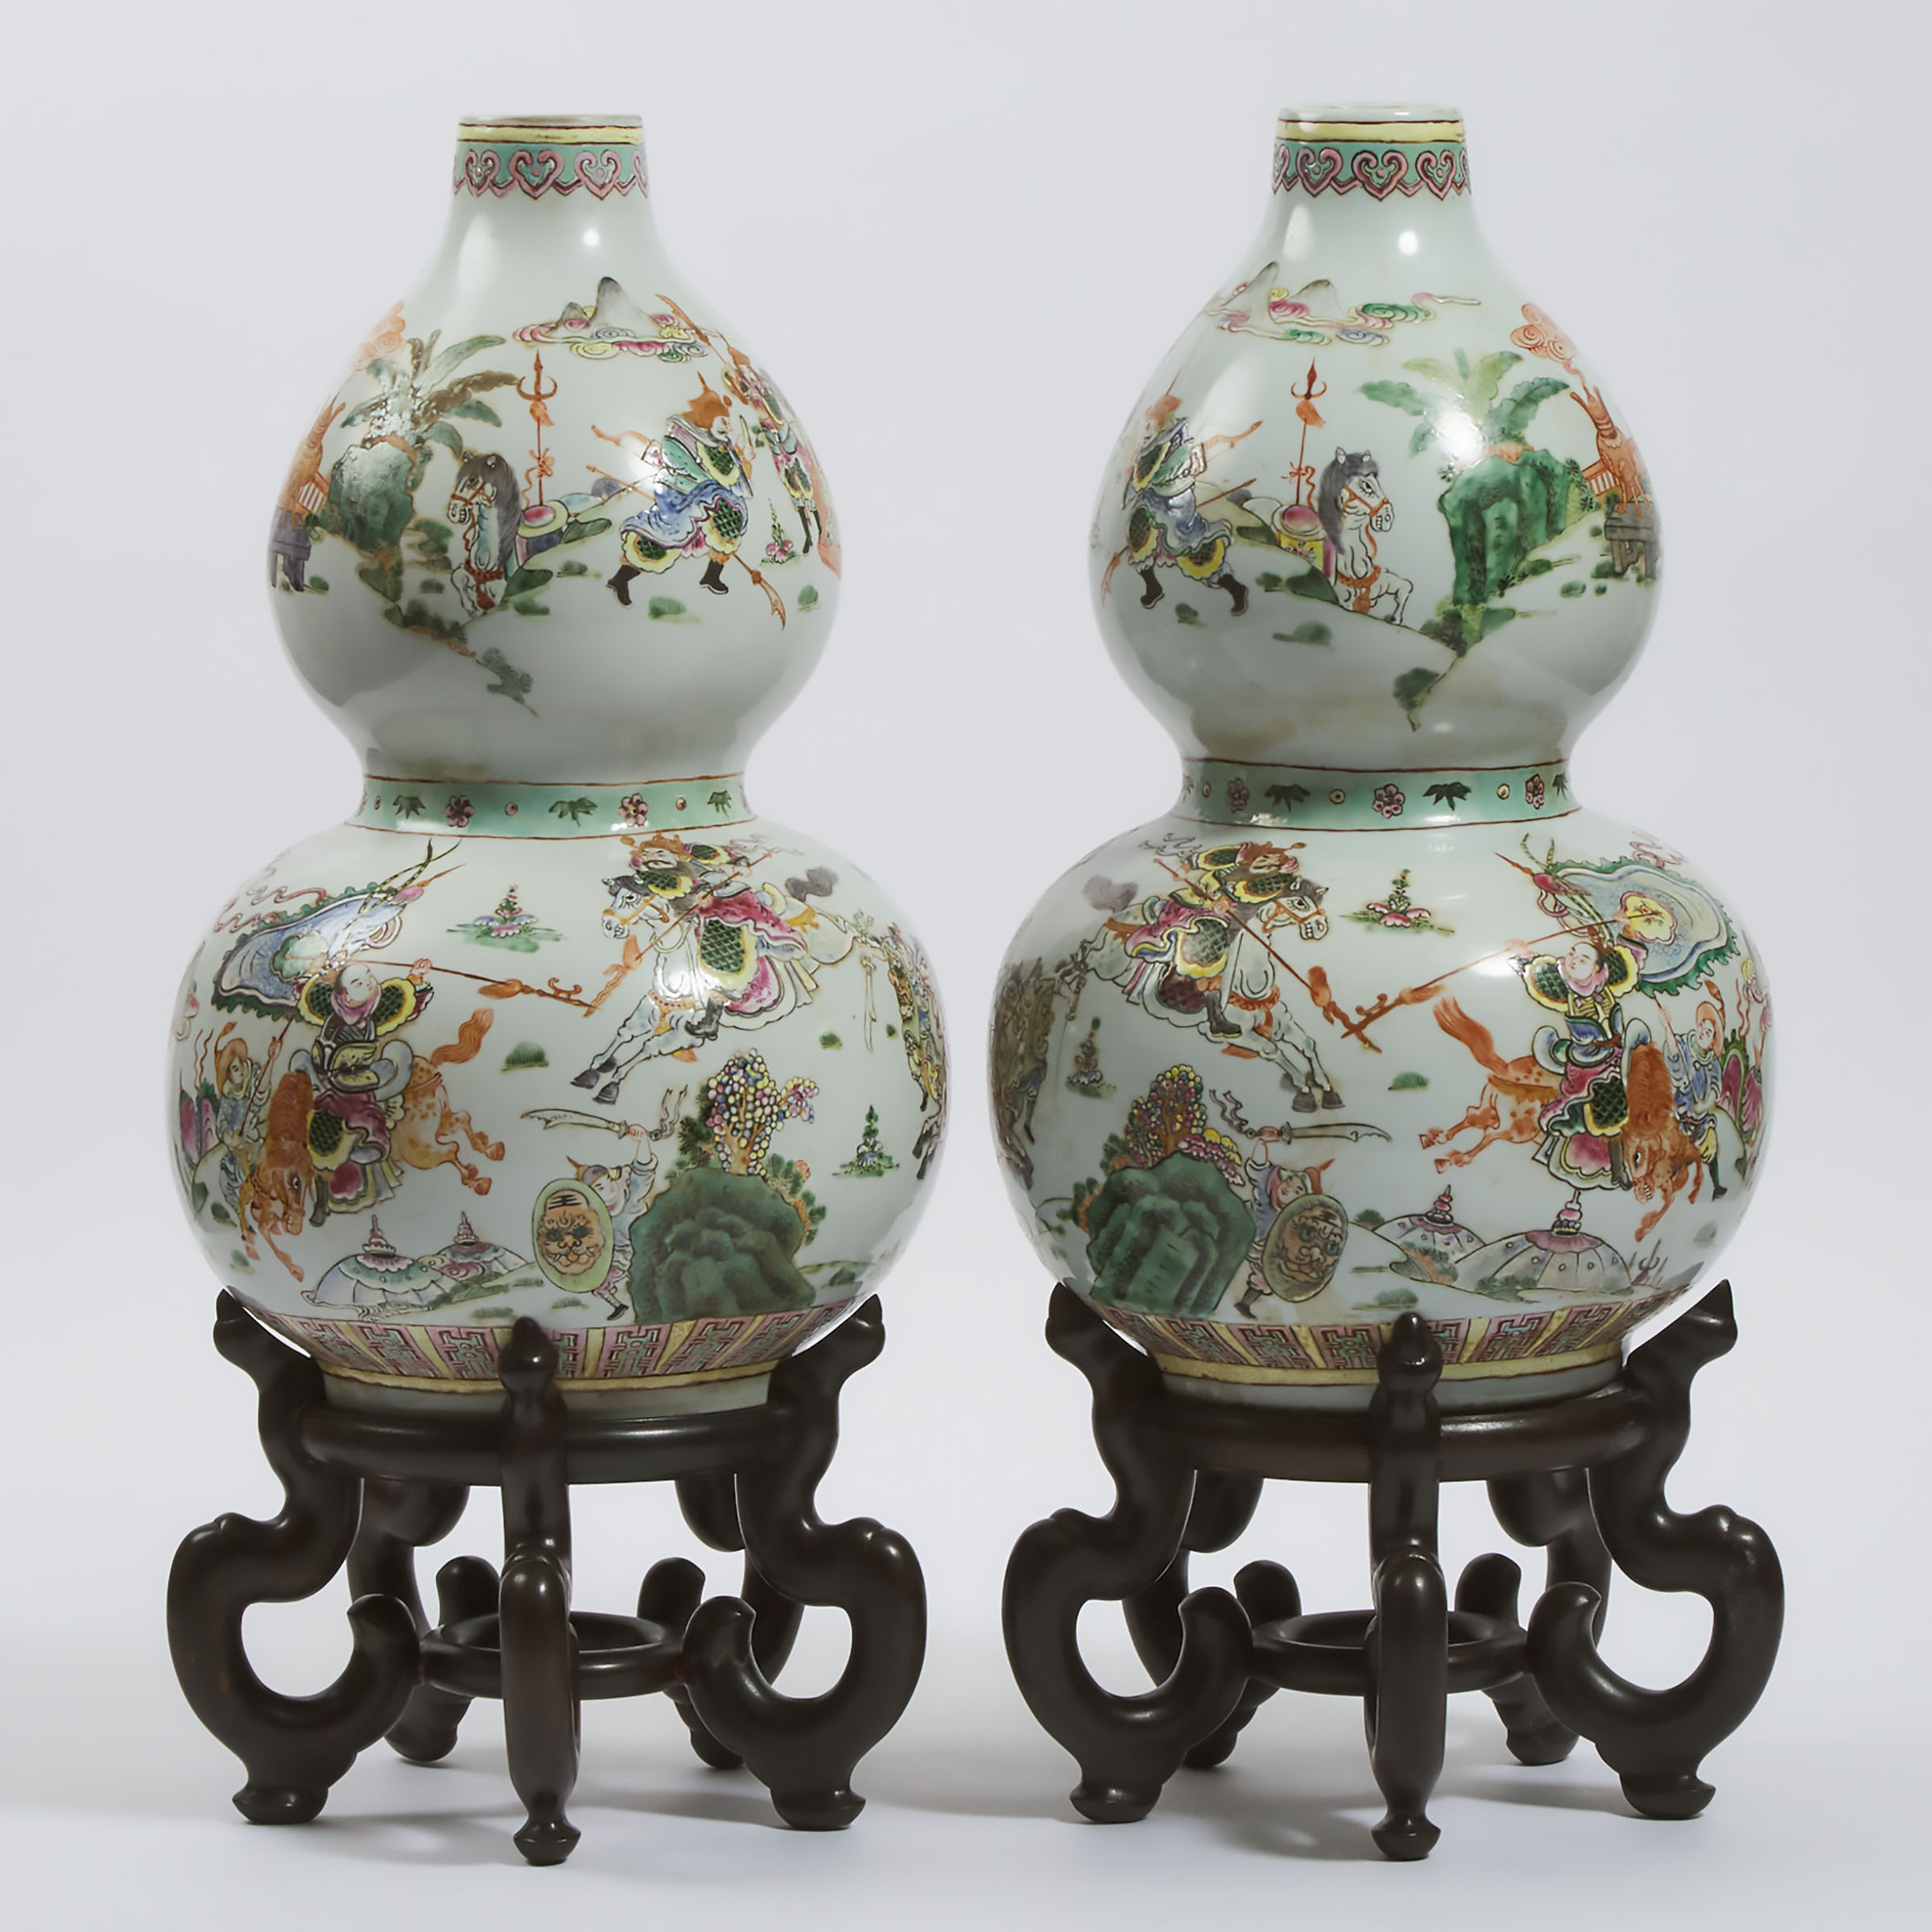 A Pair of Famille Rose Double-Gourd Vases, Mid 20th Century